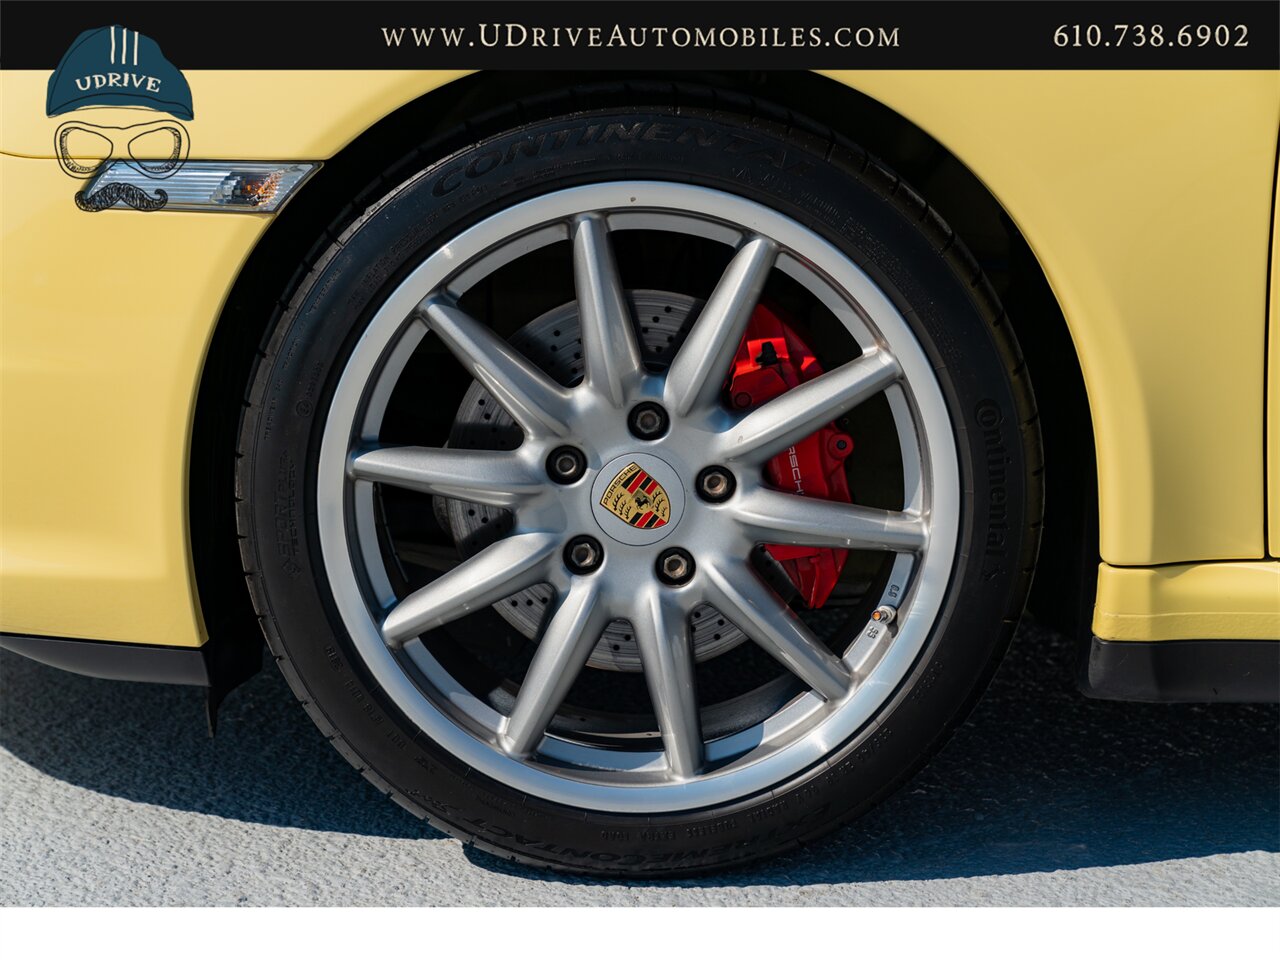 2007 Porsche 911 Carrera 4S 997 C4S Paint To Sample Pastel Yellow  6 Speed Sport Chrono Full Leather Yellow Gauges - Photo 48 - West Chester, PA 19382